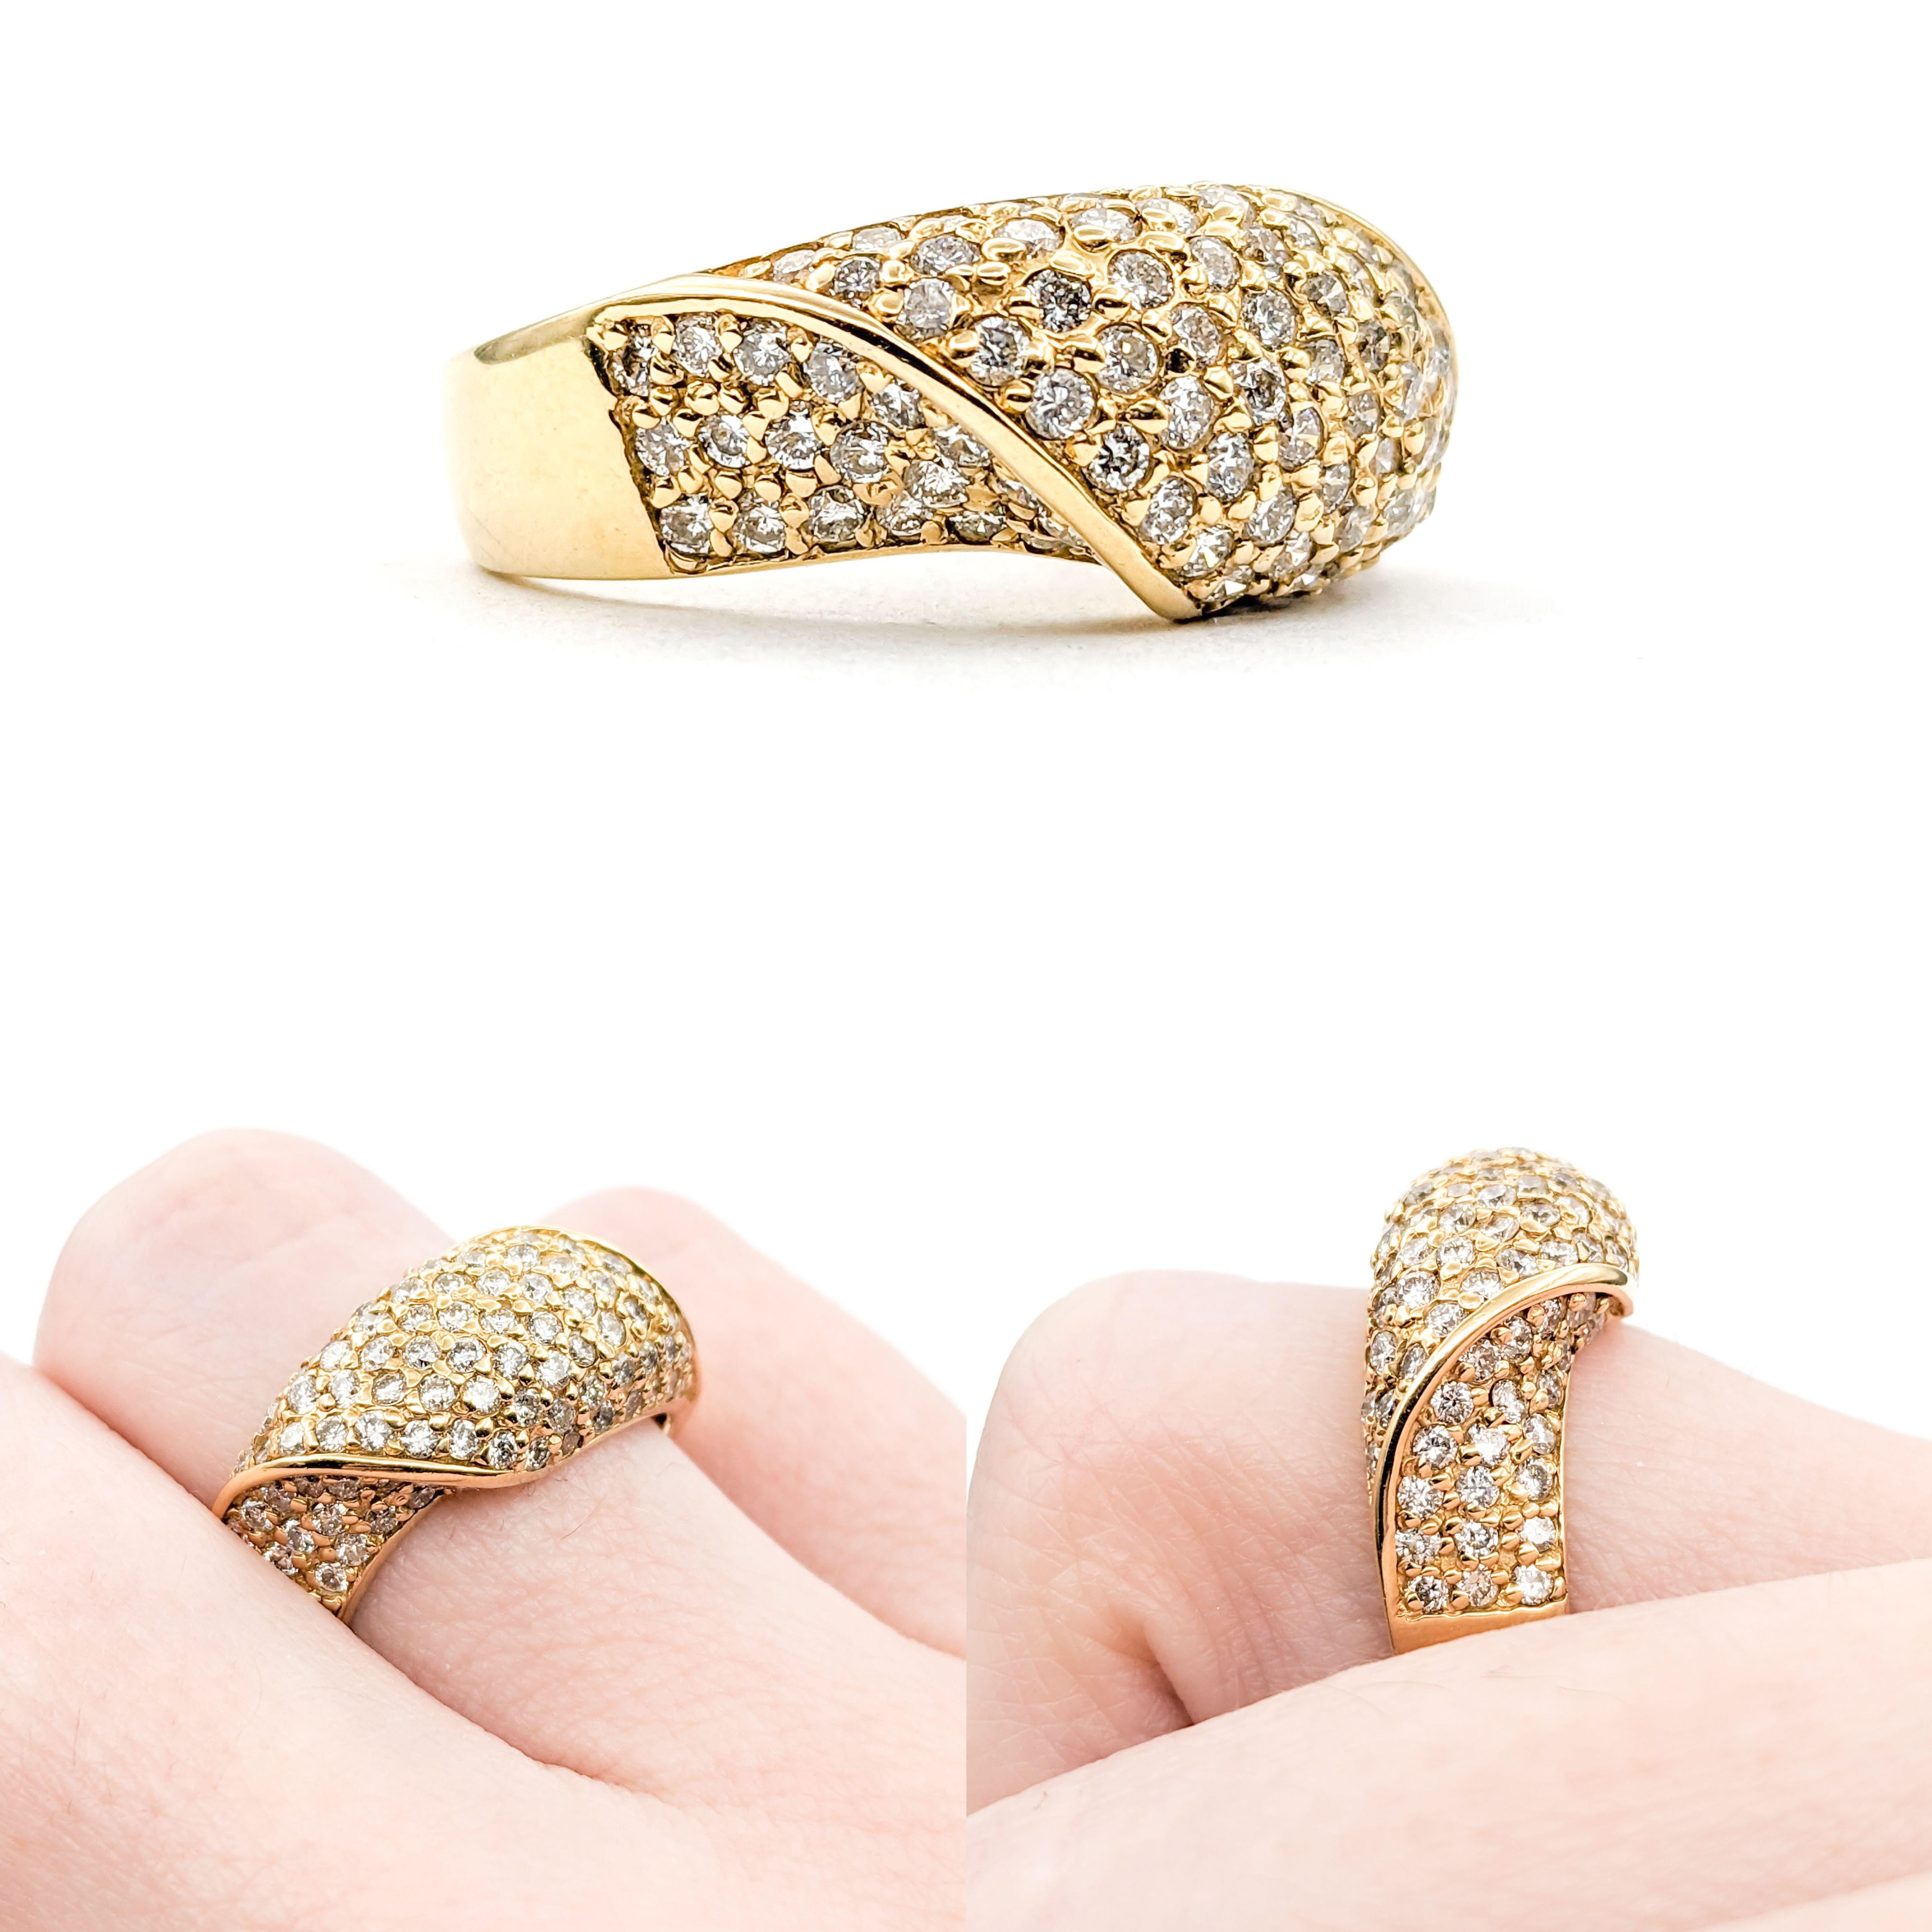 1.63ctw Diamond Ring In Yellow Gold

Experience the radiance of this stunning ring, expertly crafted in 14kt karat yellow gold. It showcases an impressive 1.63 carats of round diamonds that glitter with SI2 clarity and J-K color. This exquisite